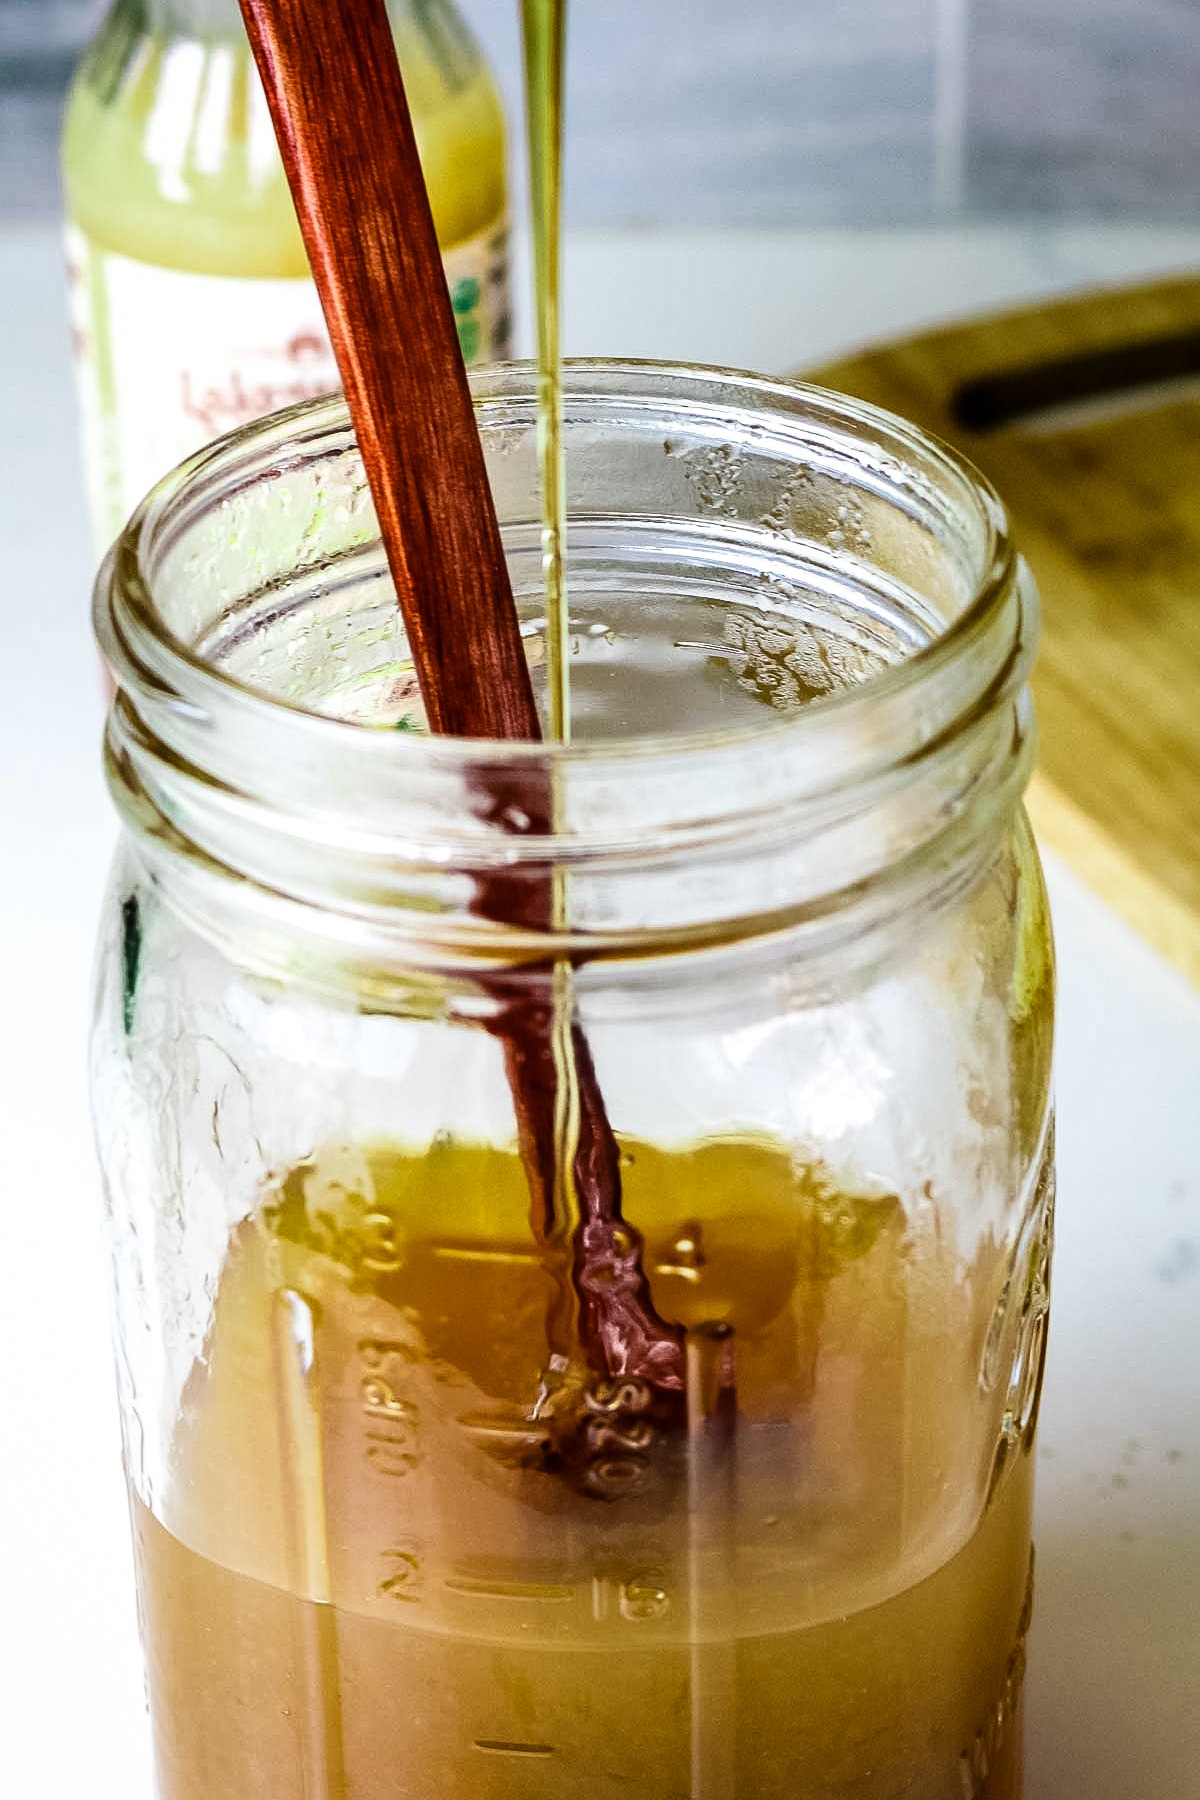 honey added to herbal tea that is muted with lemon juice.